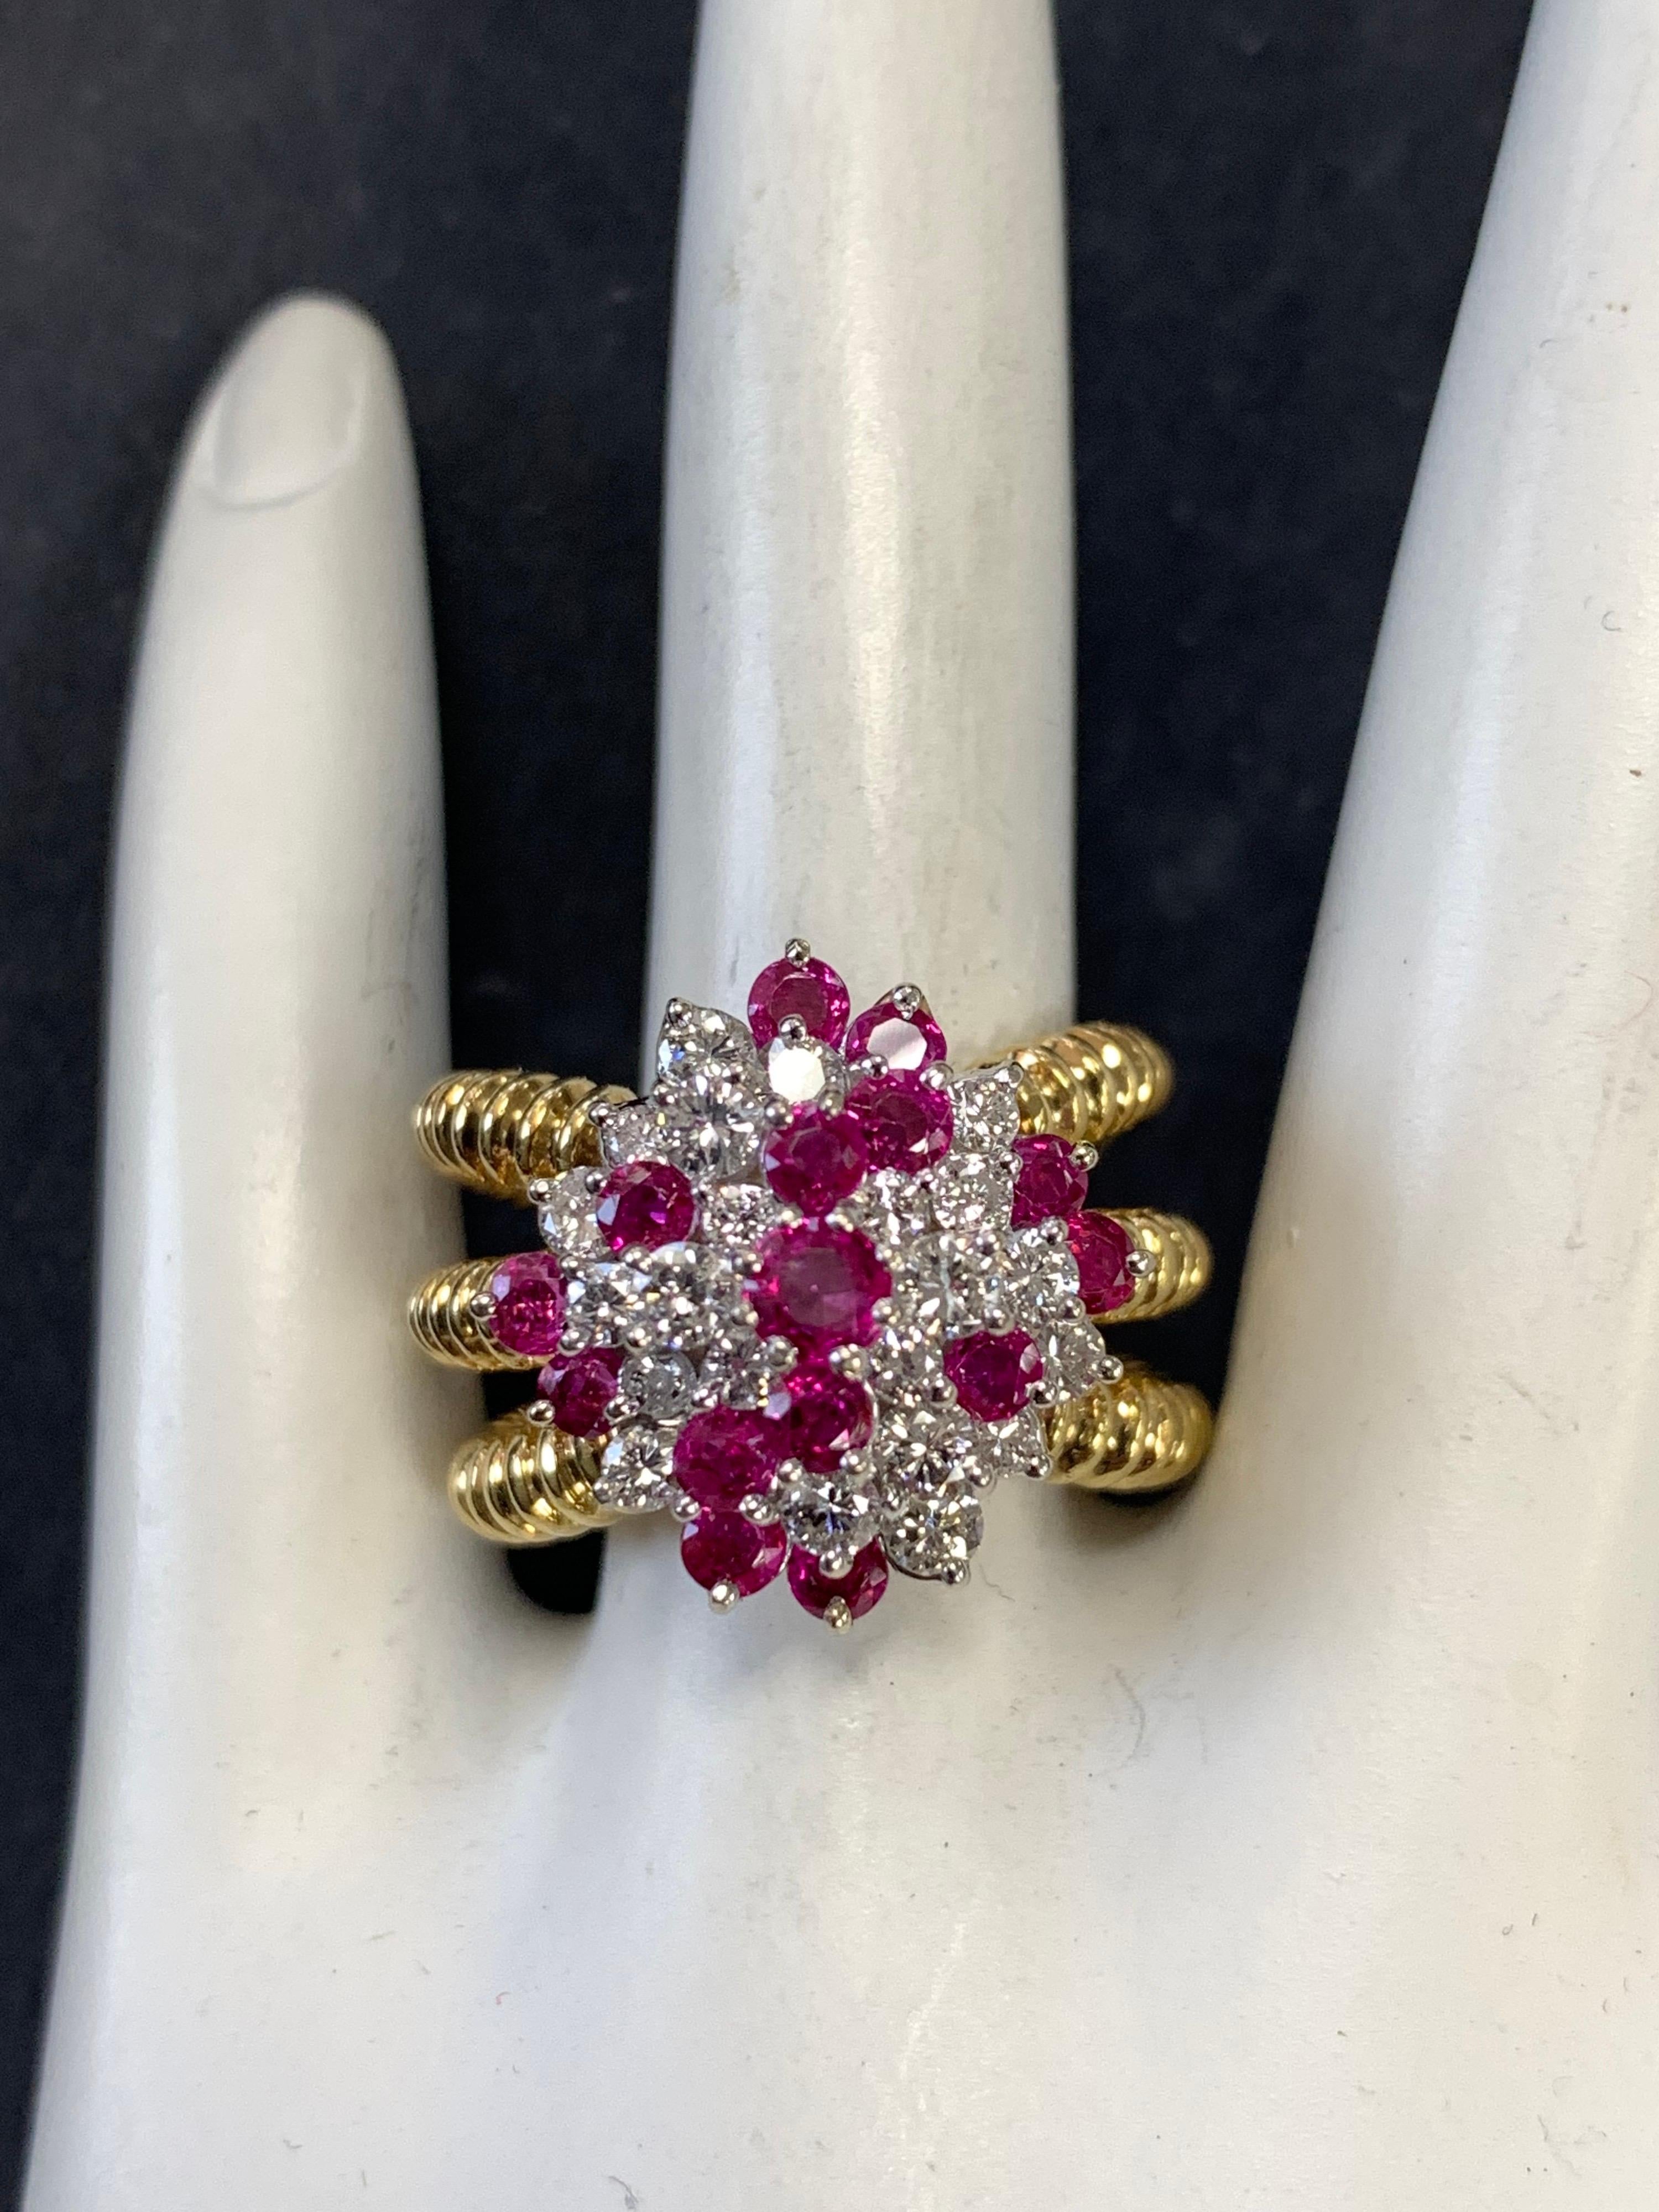 Retro Gold 2 Carat Natural Ruby Gem & Colorless Diamond Cocktail Ring Circa 1960 In Excellent Condition For Sale In Los Angeles, CA